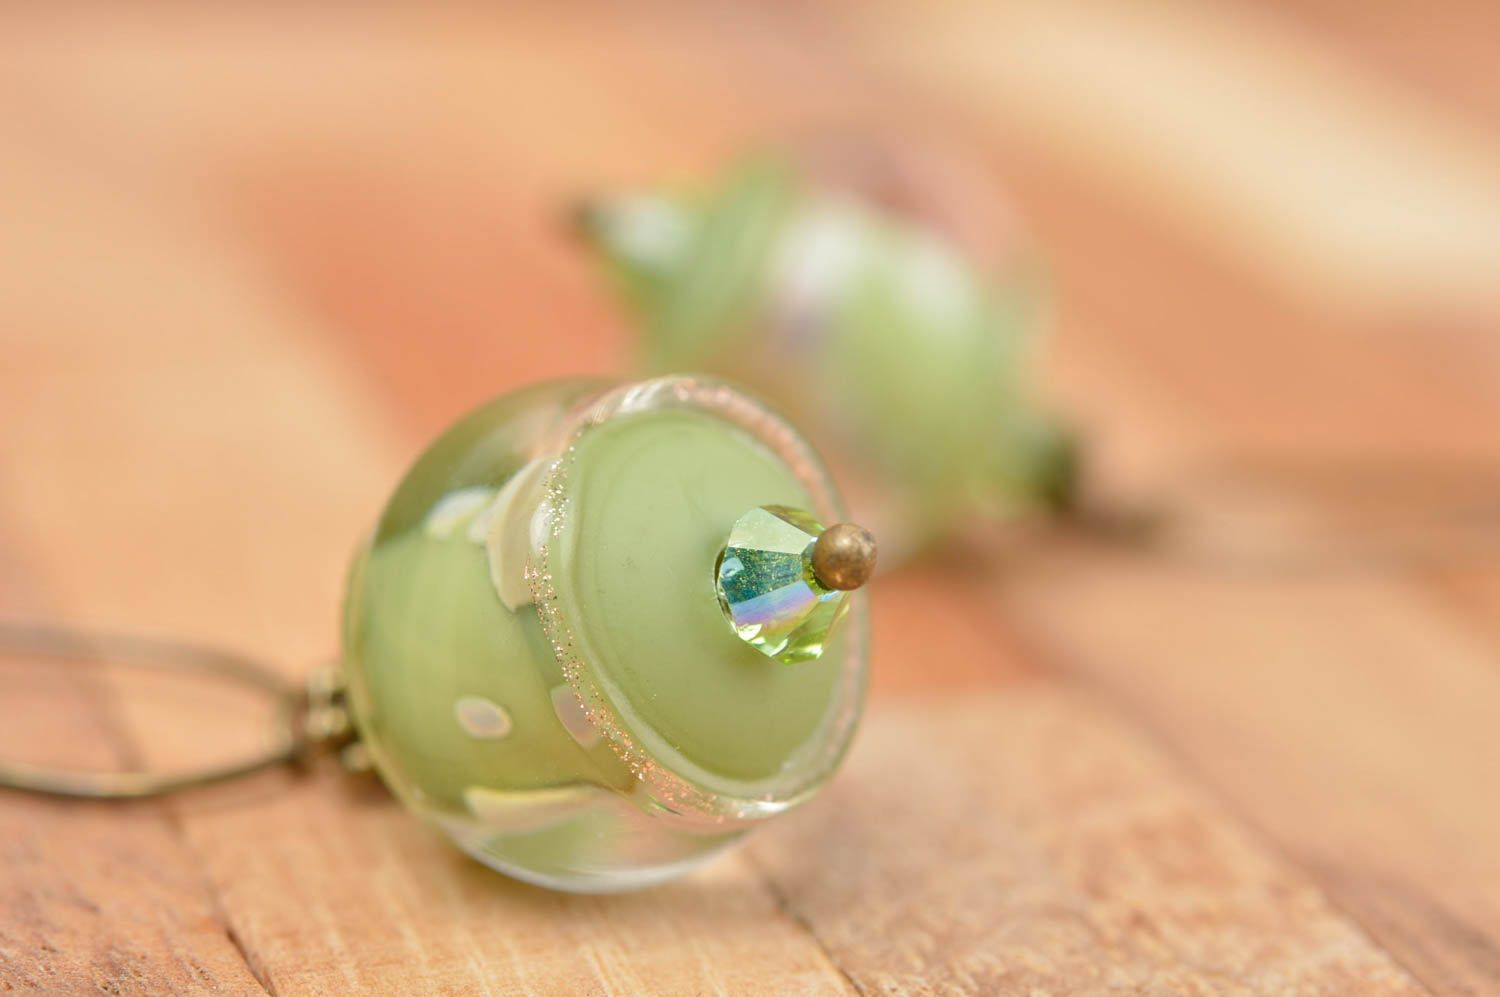 Lampwork earrings handmade glass earrings with charms glass accessories photo 5